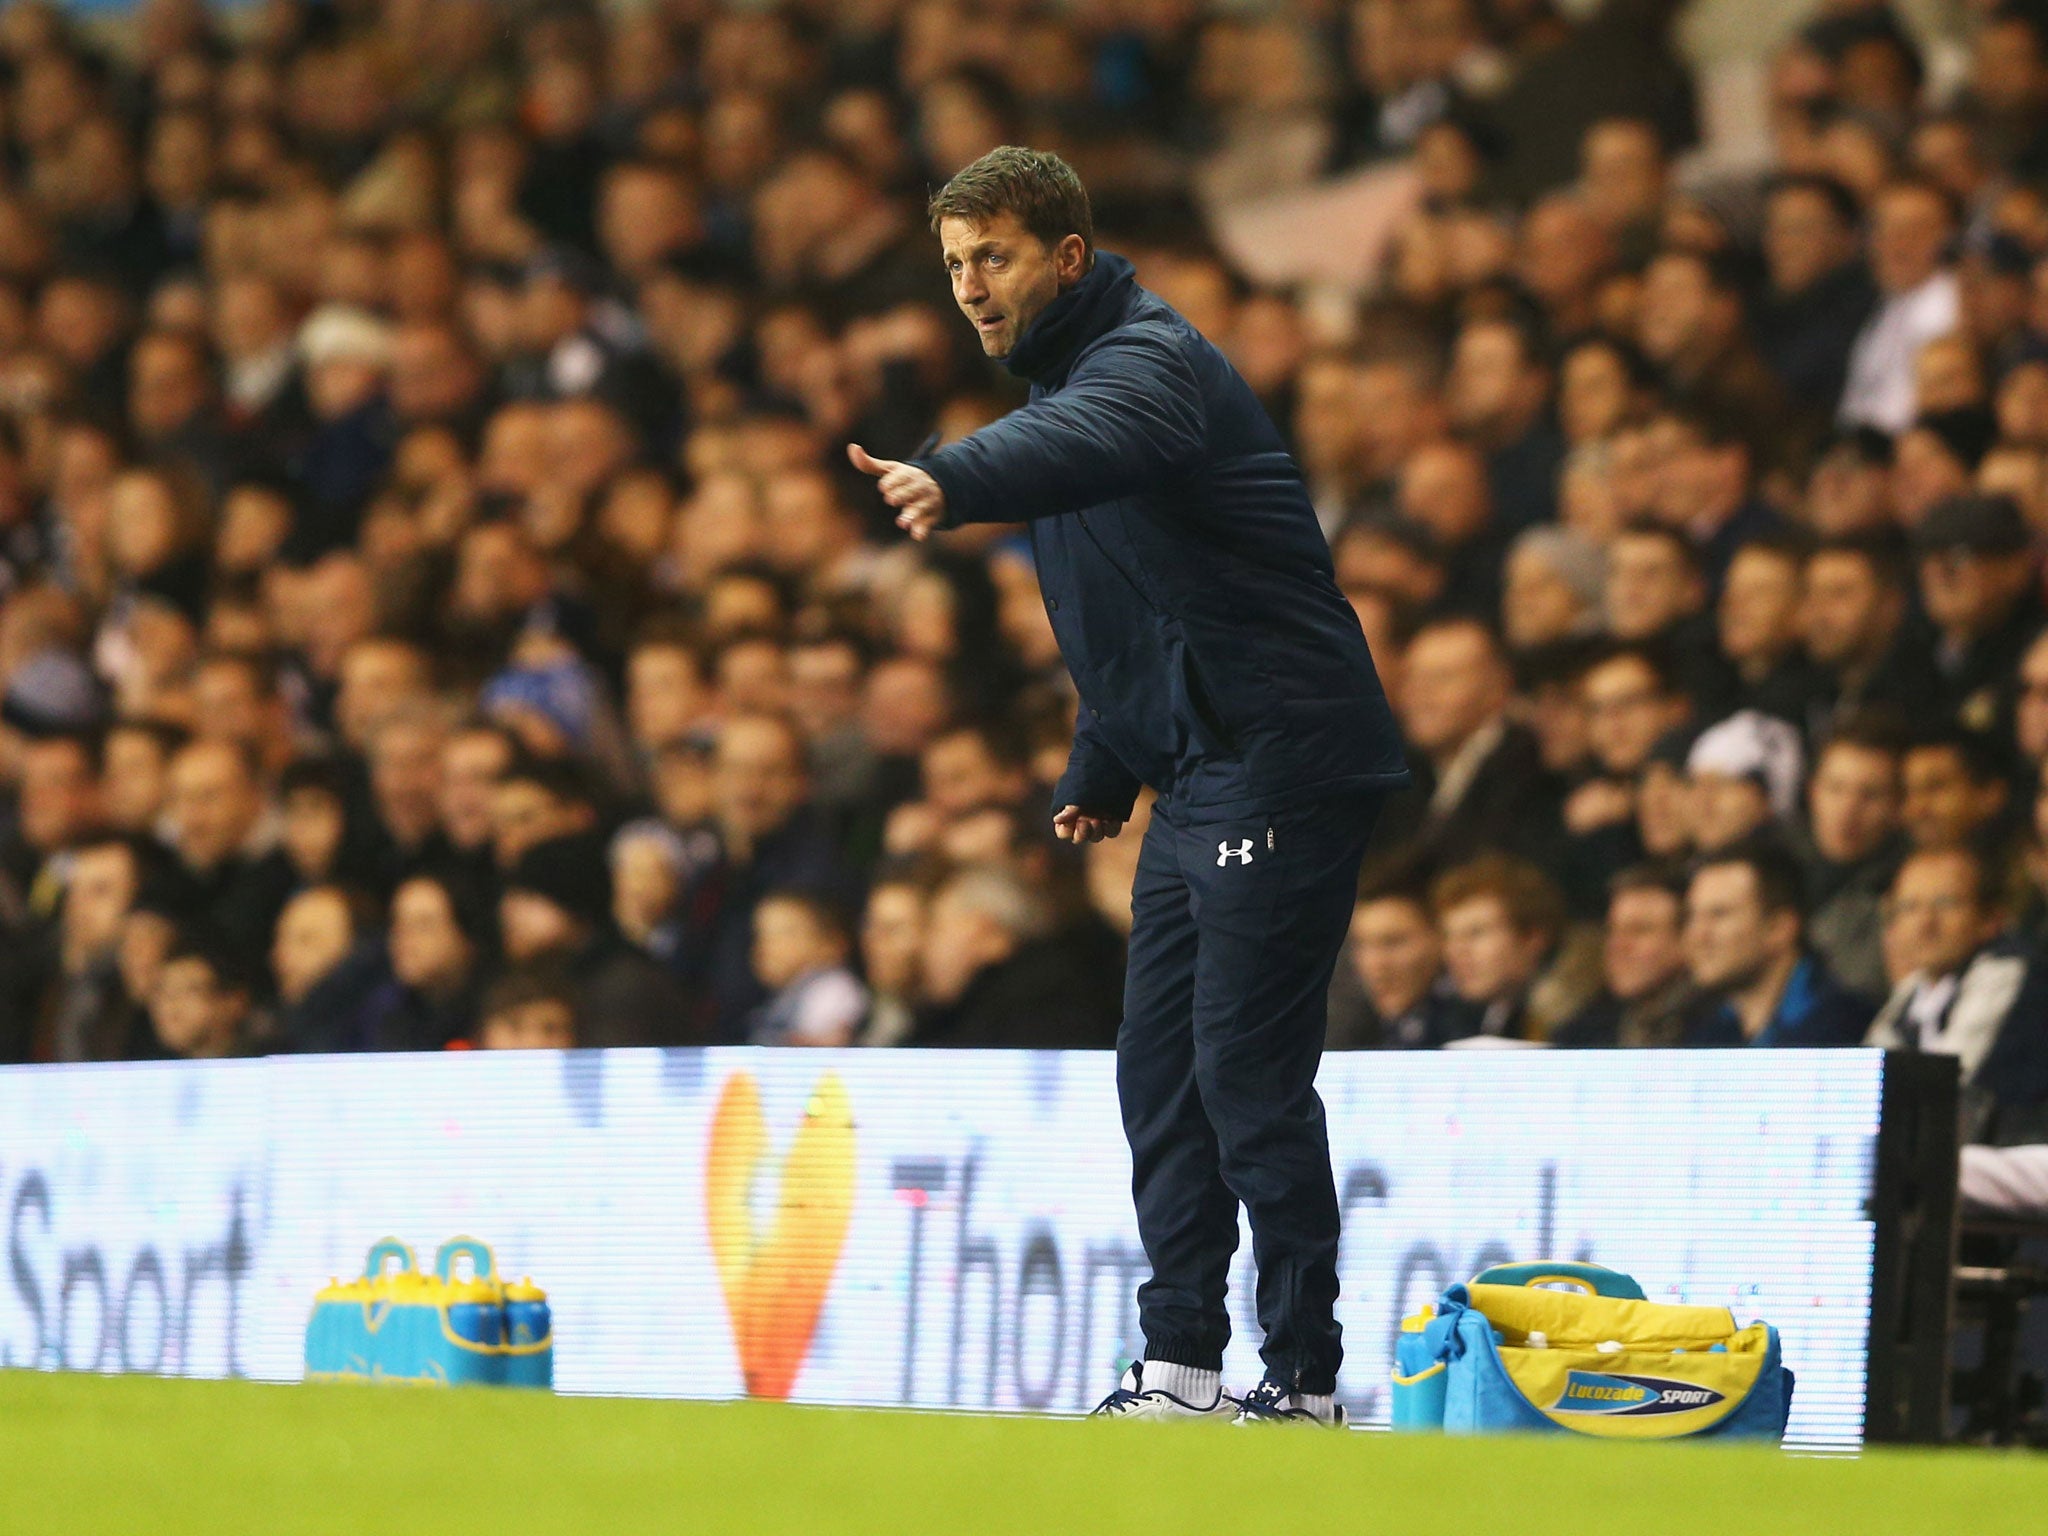 Tottenham interim manager Tim Sherwood on the sideline during the 2-1 defeat to West Ham in the League Cup quarter-finals